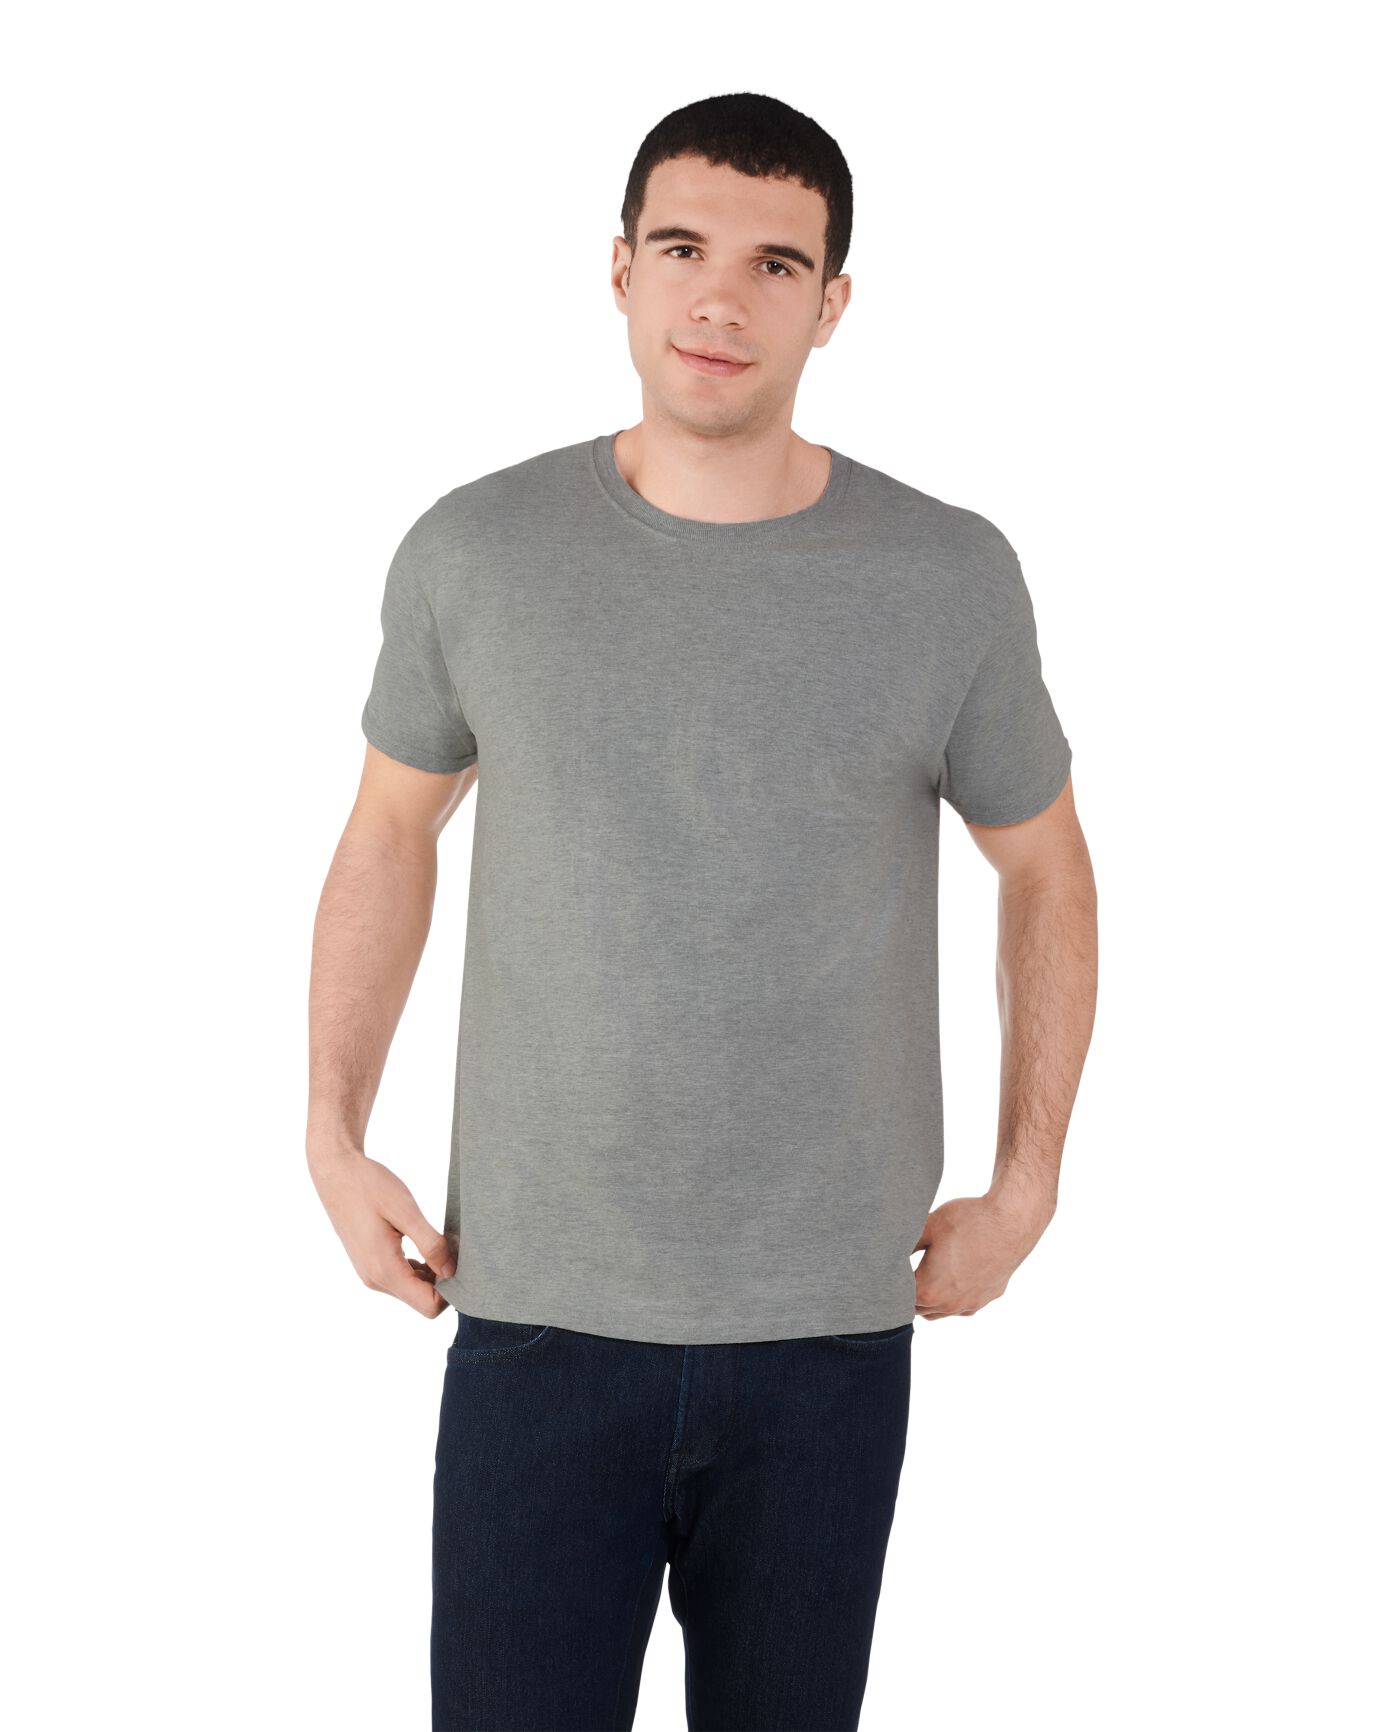 PLAIN ASH GREY USA T-SHIRT-UNFORGETTABLE GIFT- AMERICAN T-SHIRT -TOP QUALITY-LOWEST PRICE GAURANTEED-DO NOT MISS THIS CHANCE-FREE HOME(POST OFFICE) DELIVERY-ART NO. 61036-REA 27%